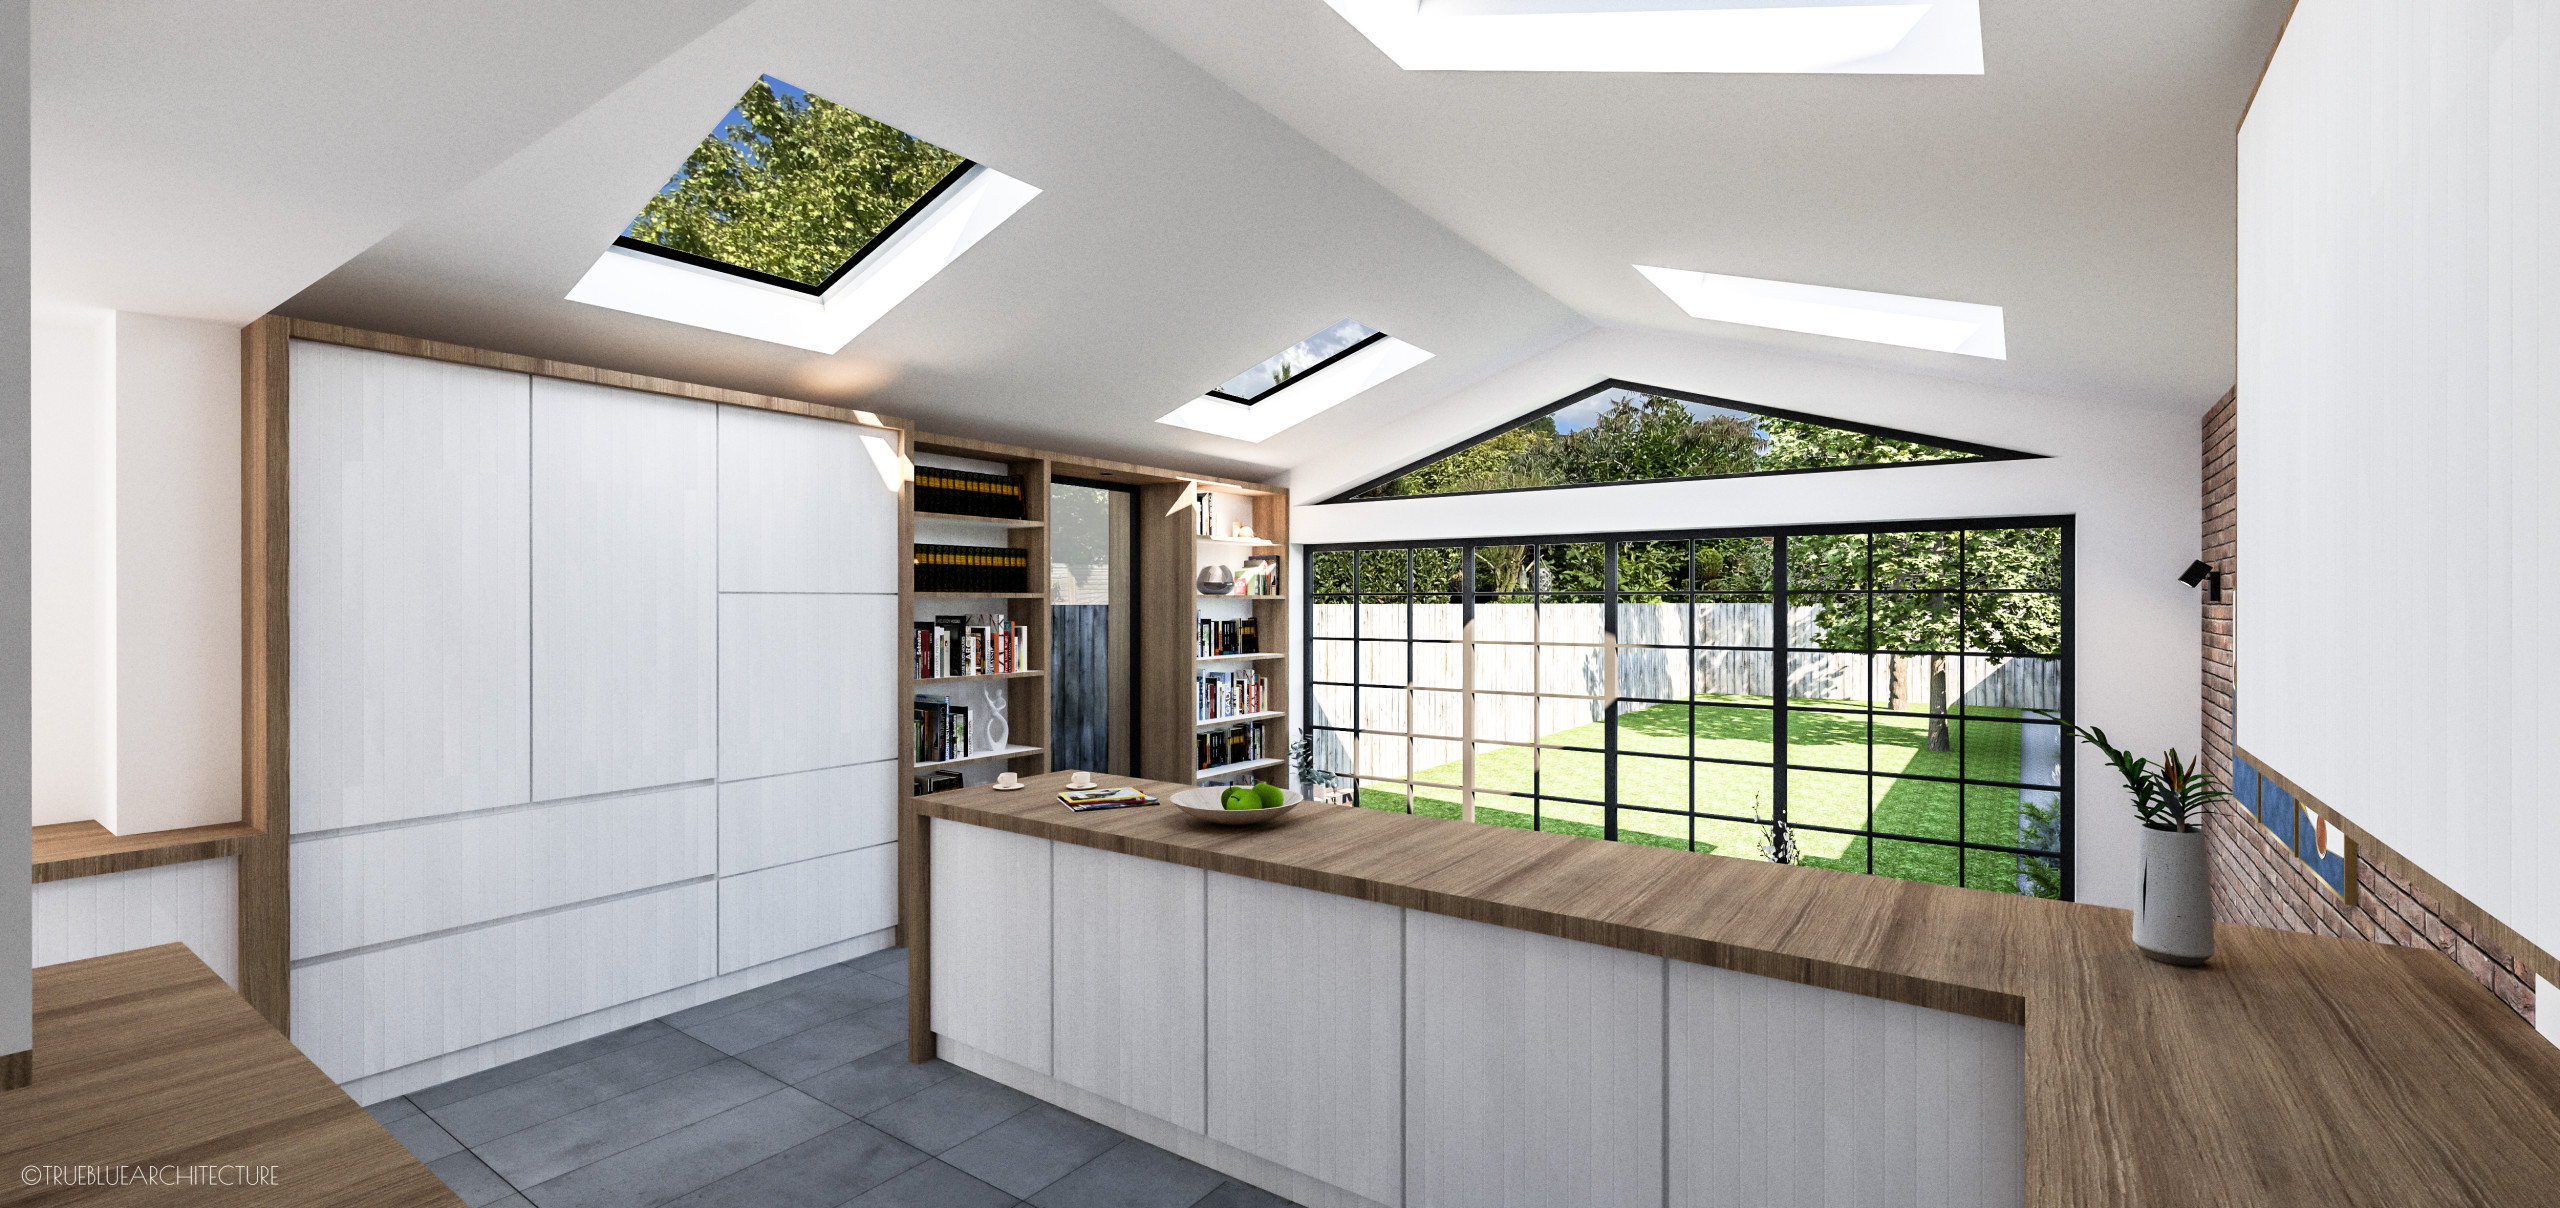 Iffley, Oxford - Rear Extension and Ground Floor Refurbishment